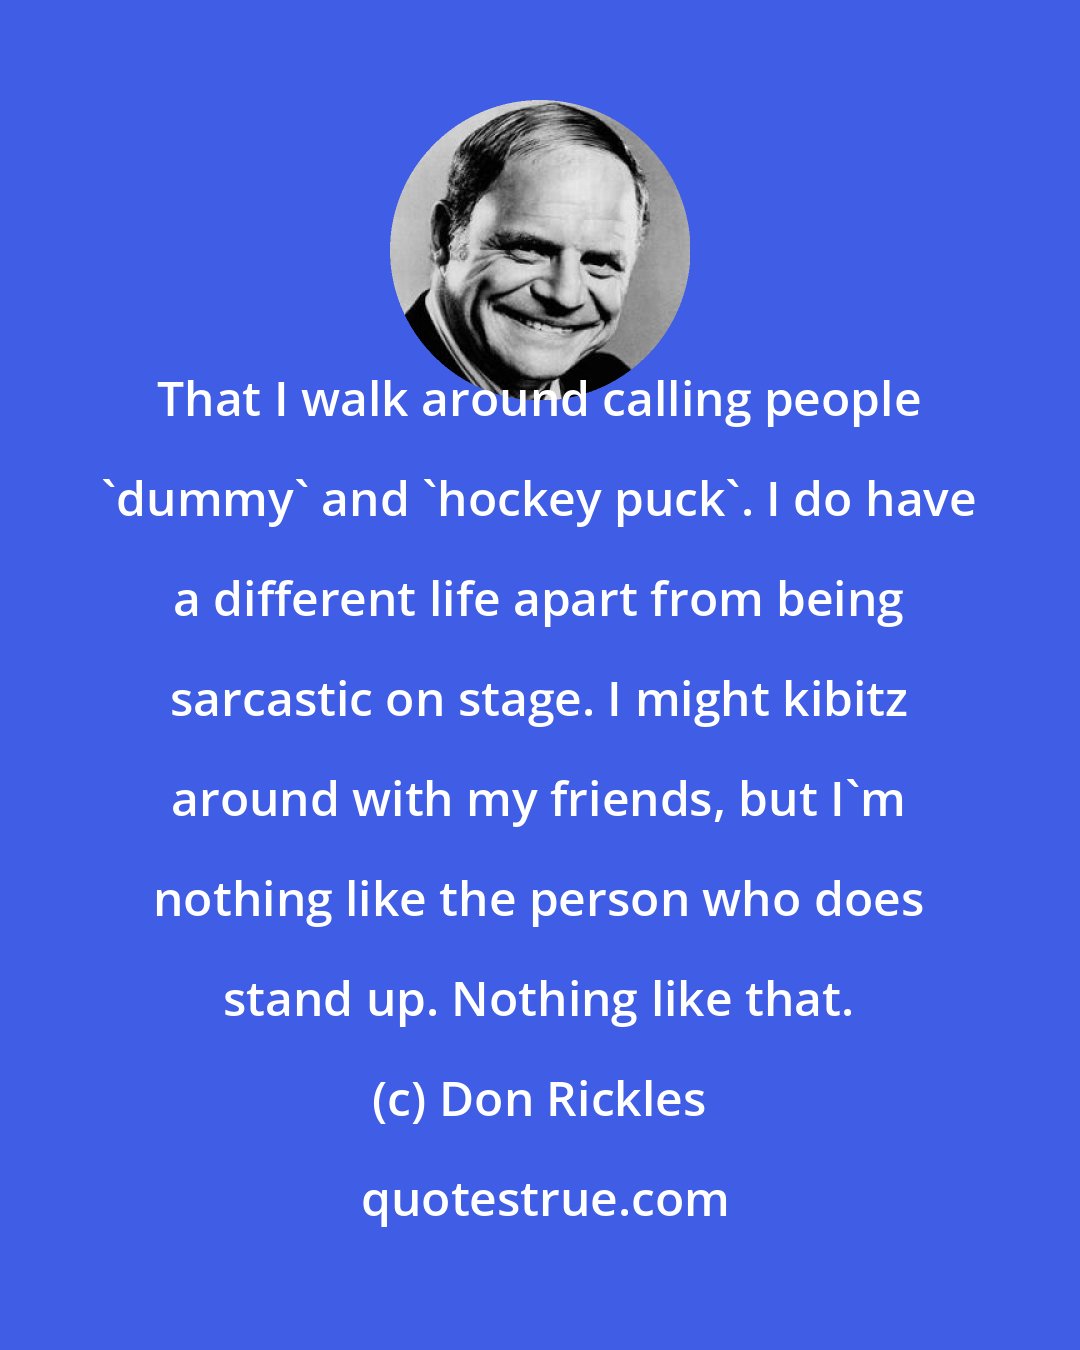 Don Rickles: That I walk around calling people 'dummy' and 'hockey puck'. I do have a different life apart from being sarcastic on stage. I might kibitz around with my friends, but I'm nothing like the person who does stand up. Nothing like that.